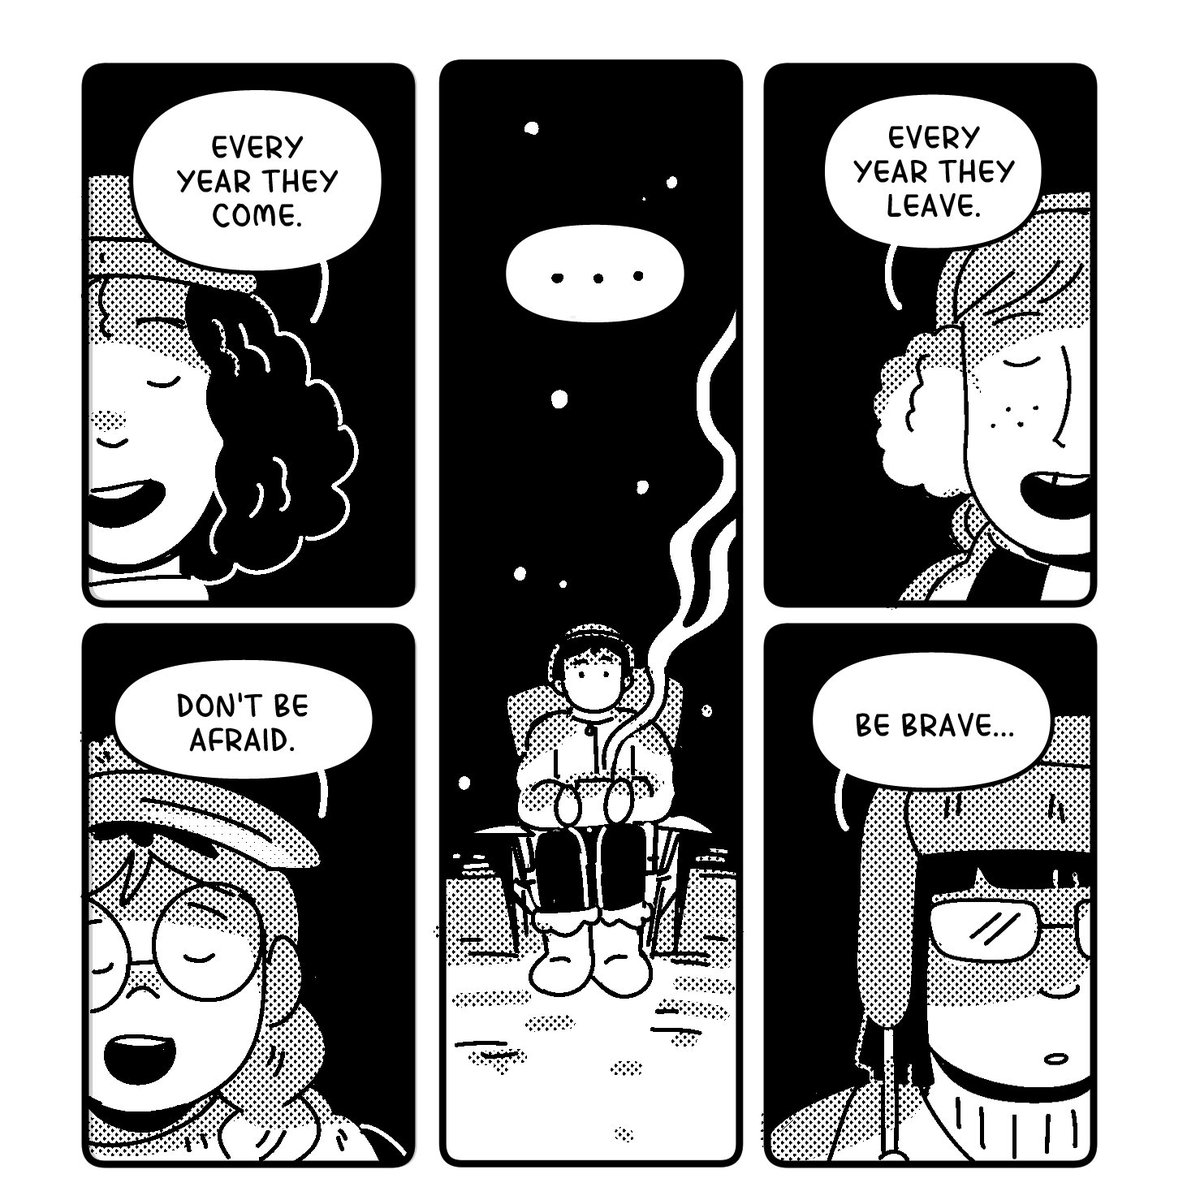 a short preview of my comic for 'Seasons', debuting at TCAF this weekend!! what happens when you have a snowfield, a group of friends, and Something Strange in the night sky? read and find out! 🖤